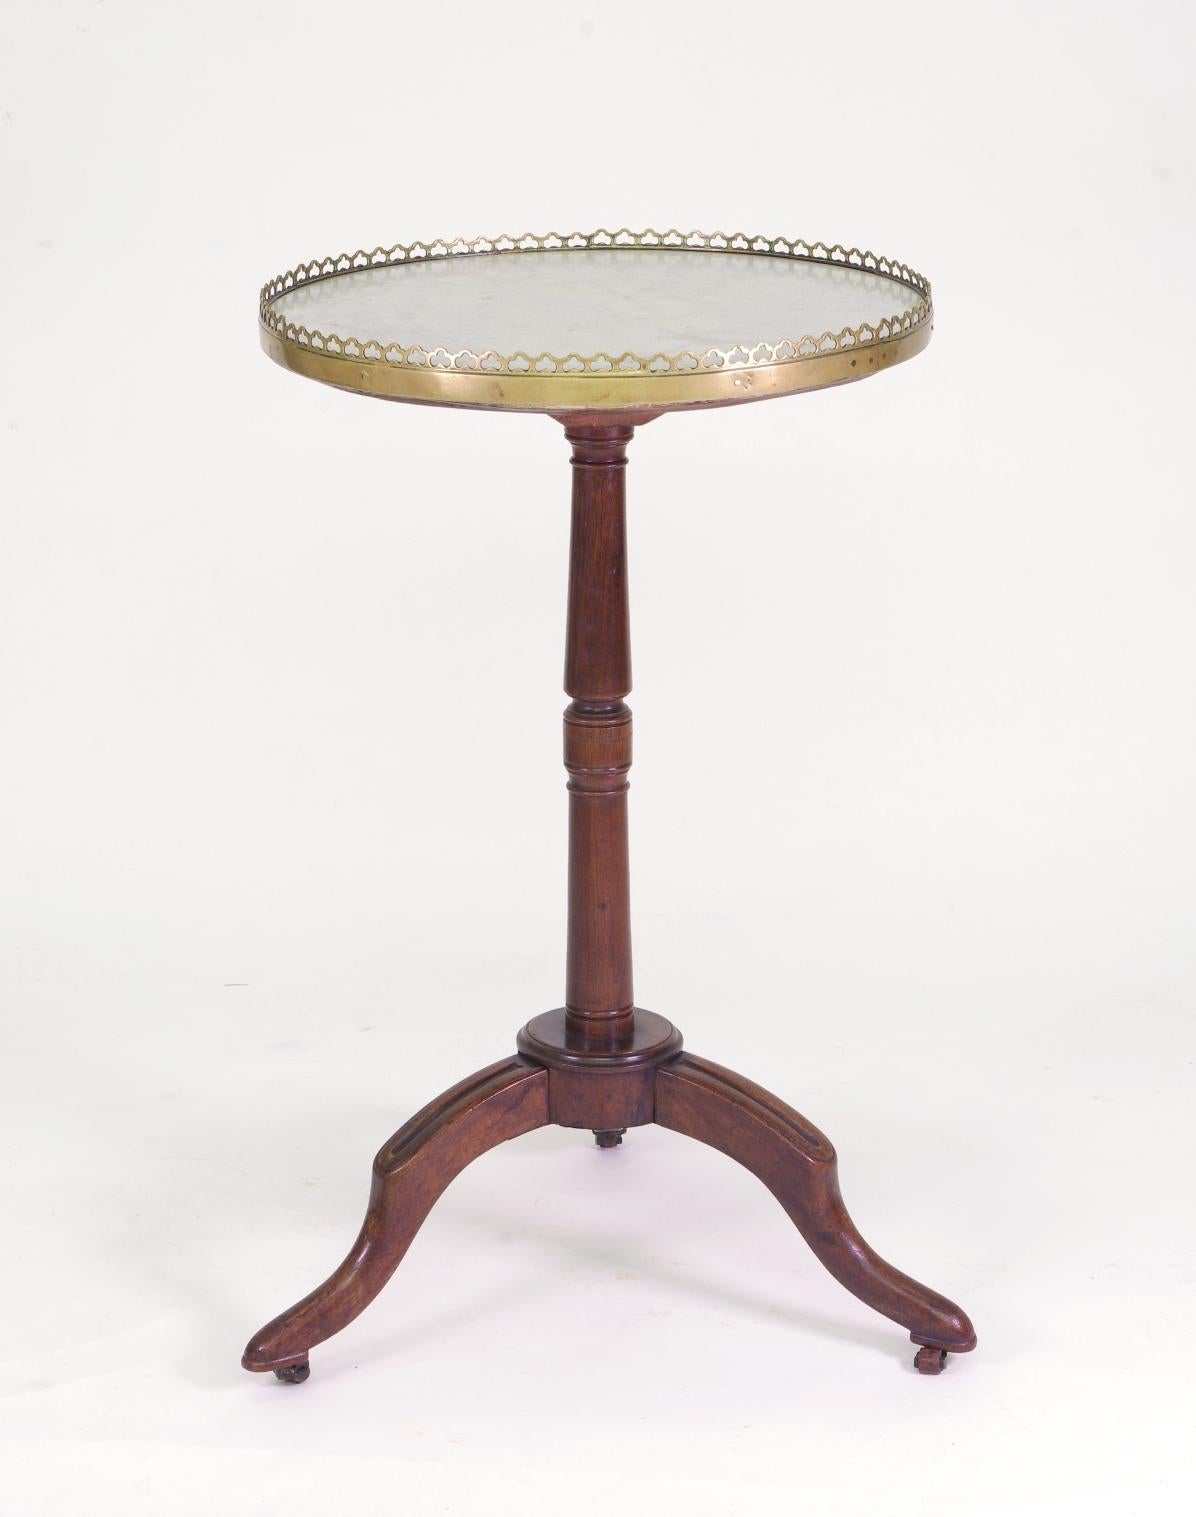 Directoire walnut guéridon or side table, the white marble top with a pierced brass gallery; the turned post supported by three cabriole legs with carved knees. Stamped J P Dusautoy (see photo).

Jean-Pierre Dusautoy was born in 1751 and received